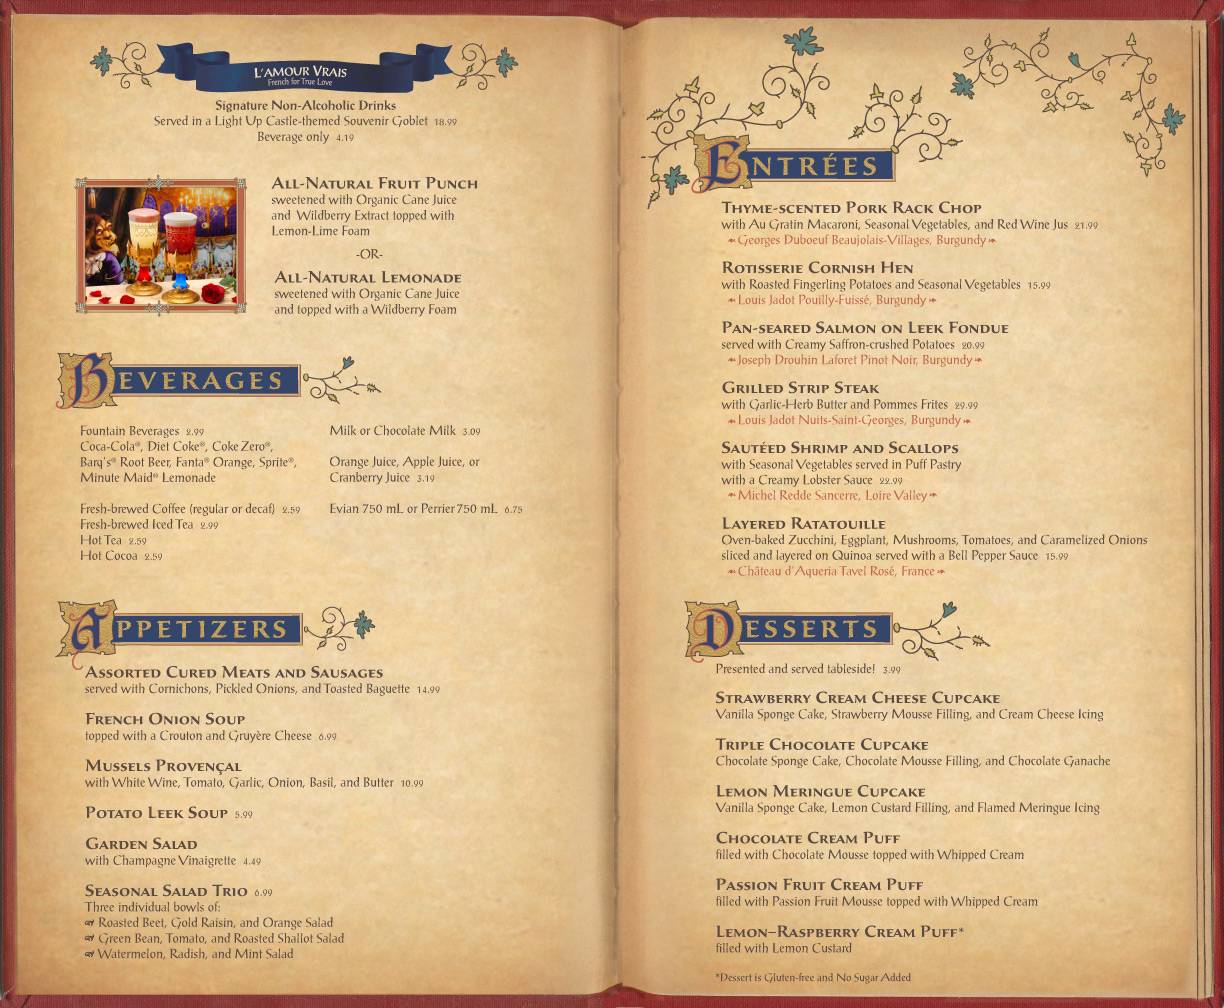 Be Our Guest Restaurant dinner menu inside pages